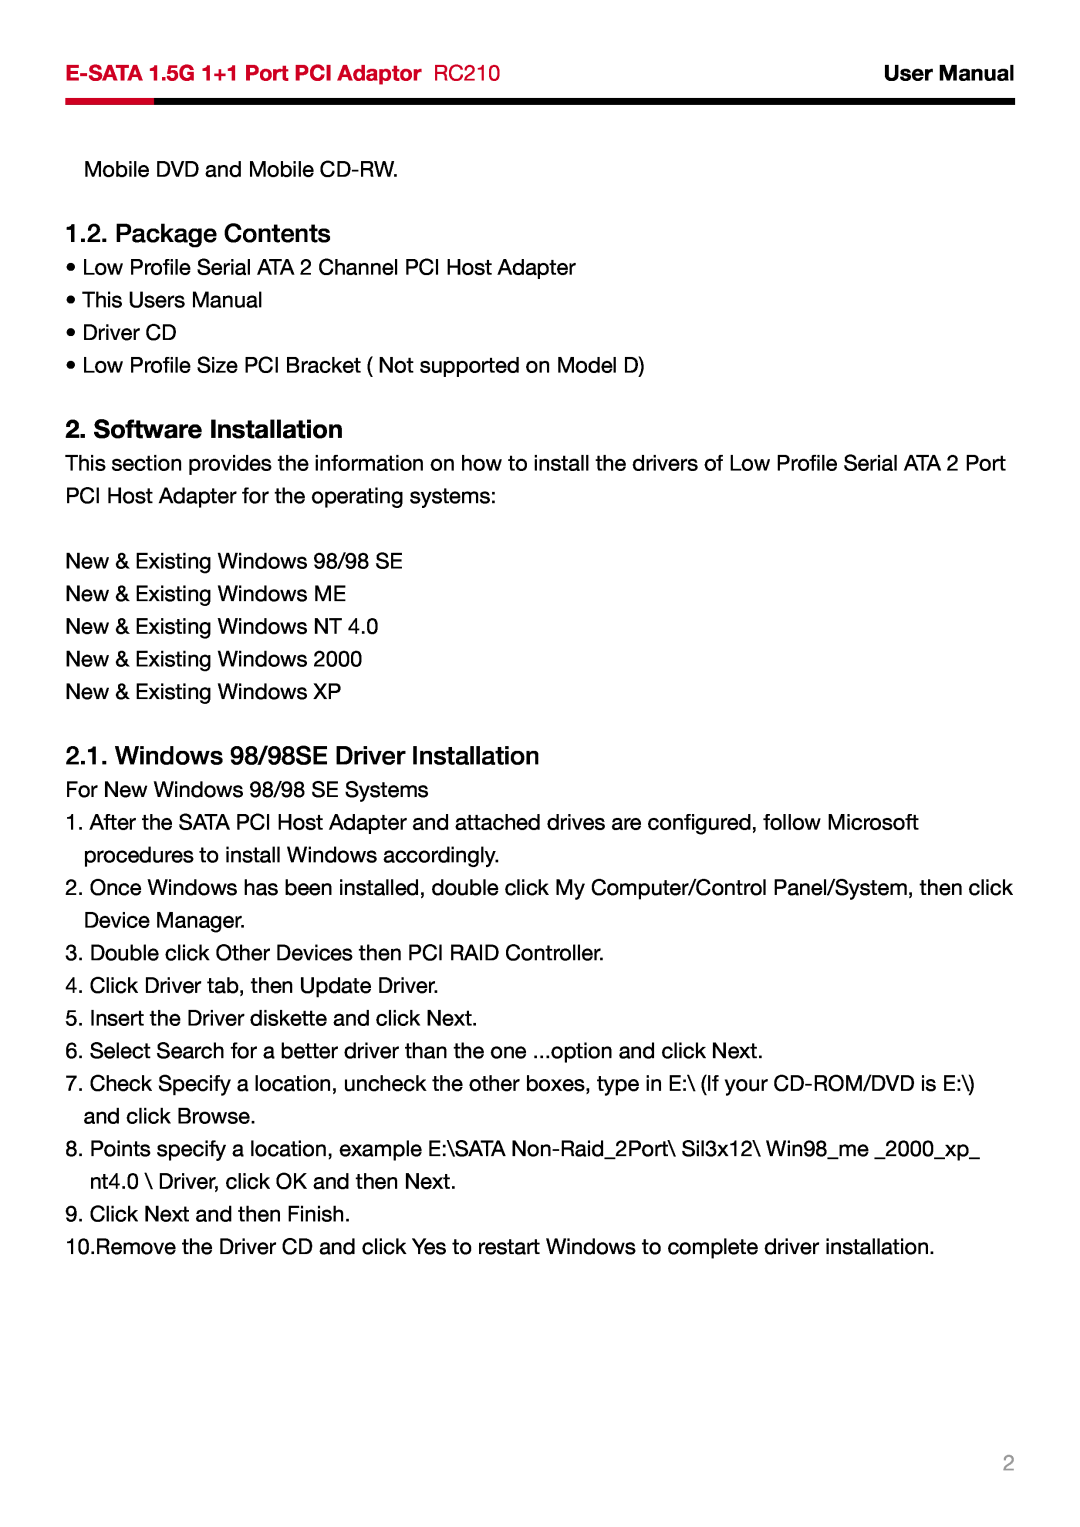 Rosewill RC210 user manual Package Contents, Software Installation, Windows 98/98SE Driver Installation, User Manual 